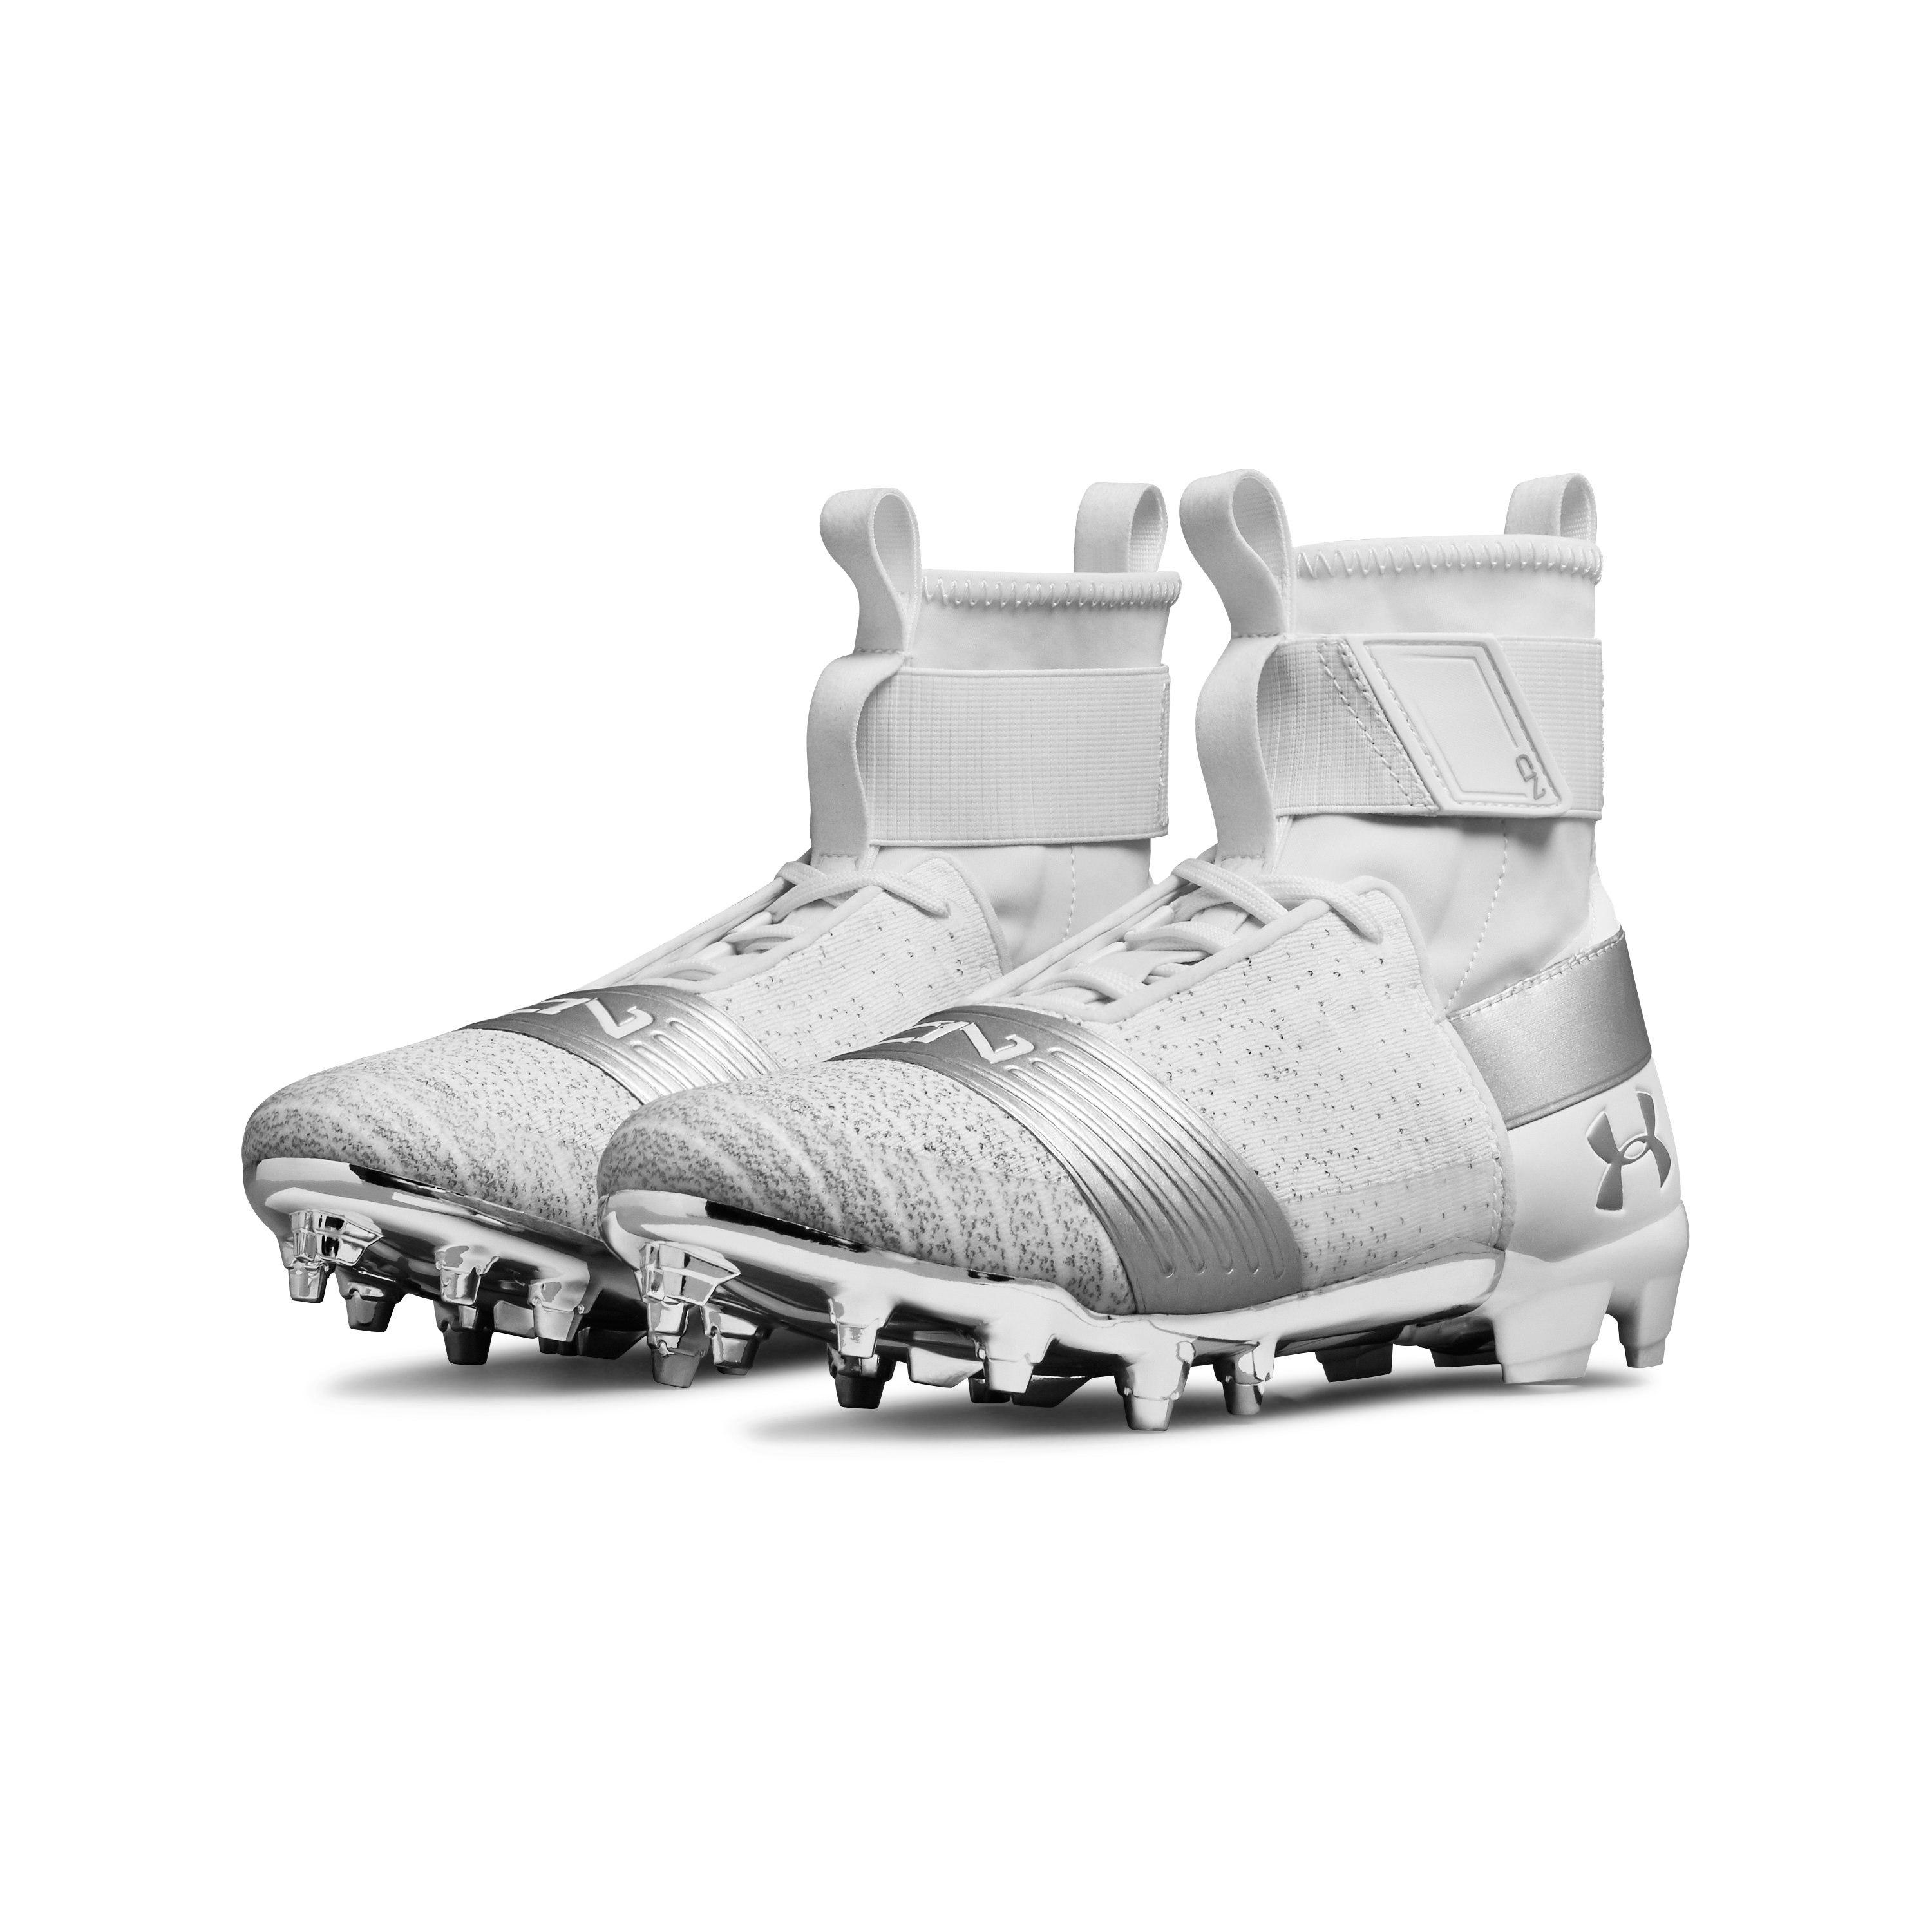 Under Armour C1N MC Men's Football Cleats Style 1269640-200 MSRP $150 